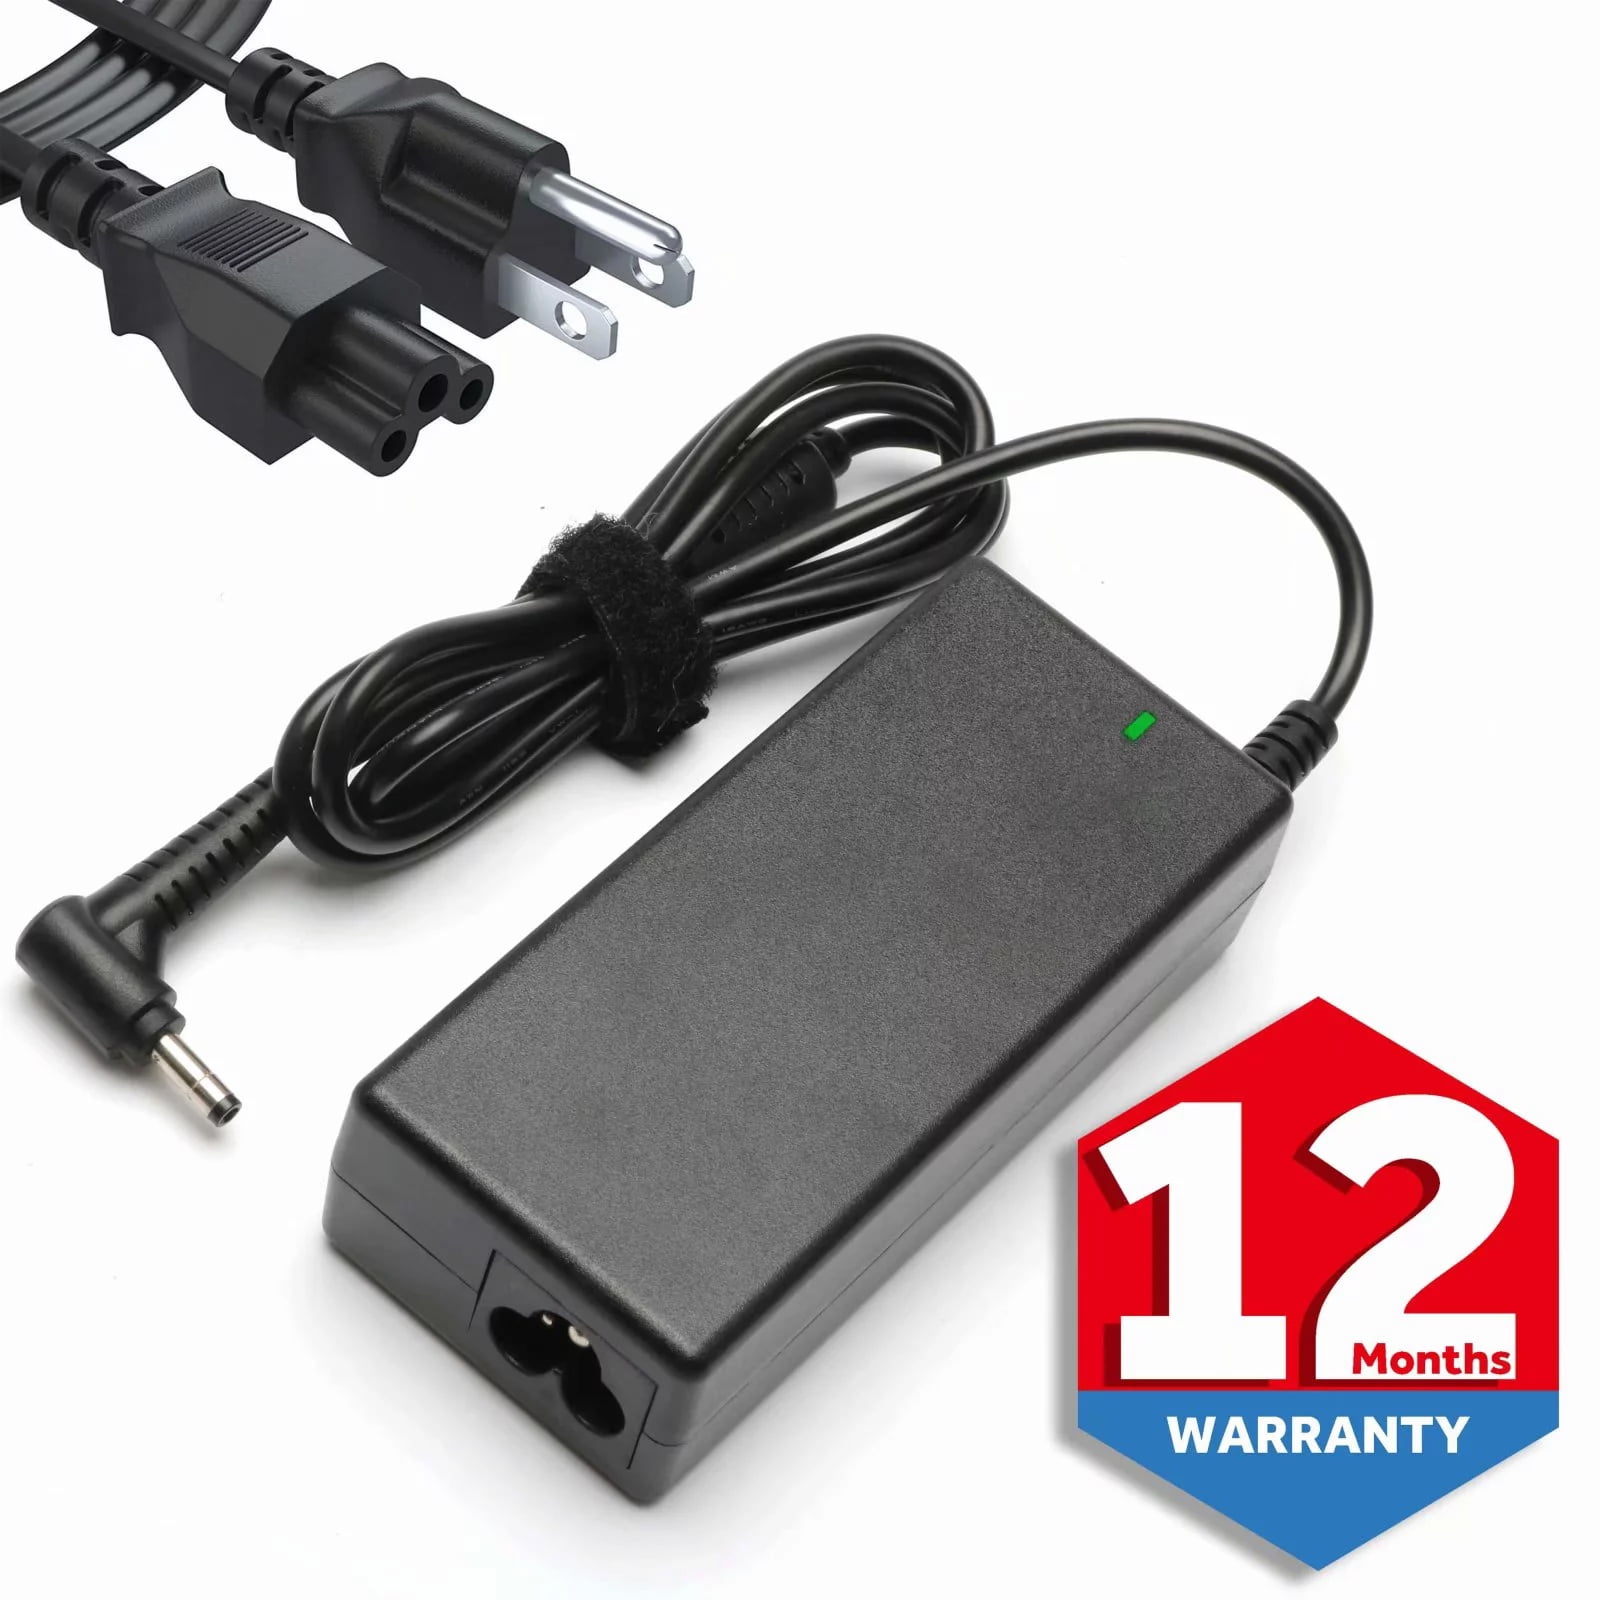 20V 3.25A 65W 4.0*1.7mm AC Laptop Charger For Lenovo IdeaPad 320 100-15  B50-10 YOGA 710 510-14ISK Notebook Power Adapter